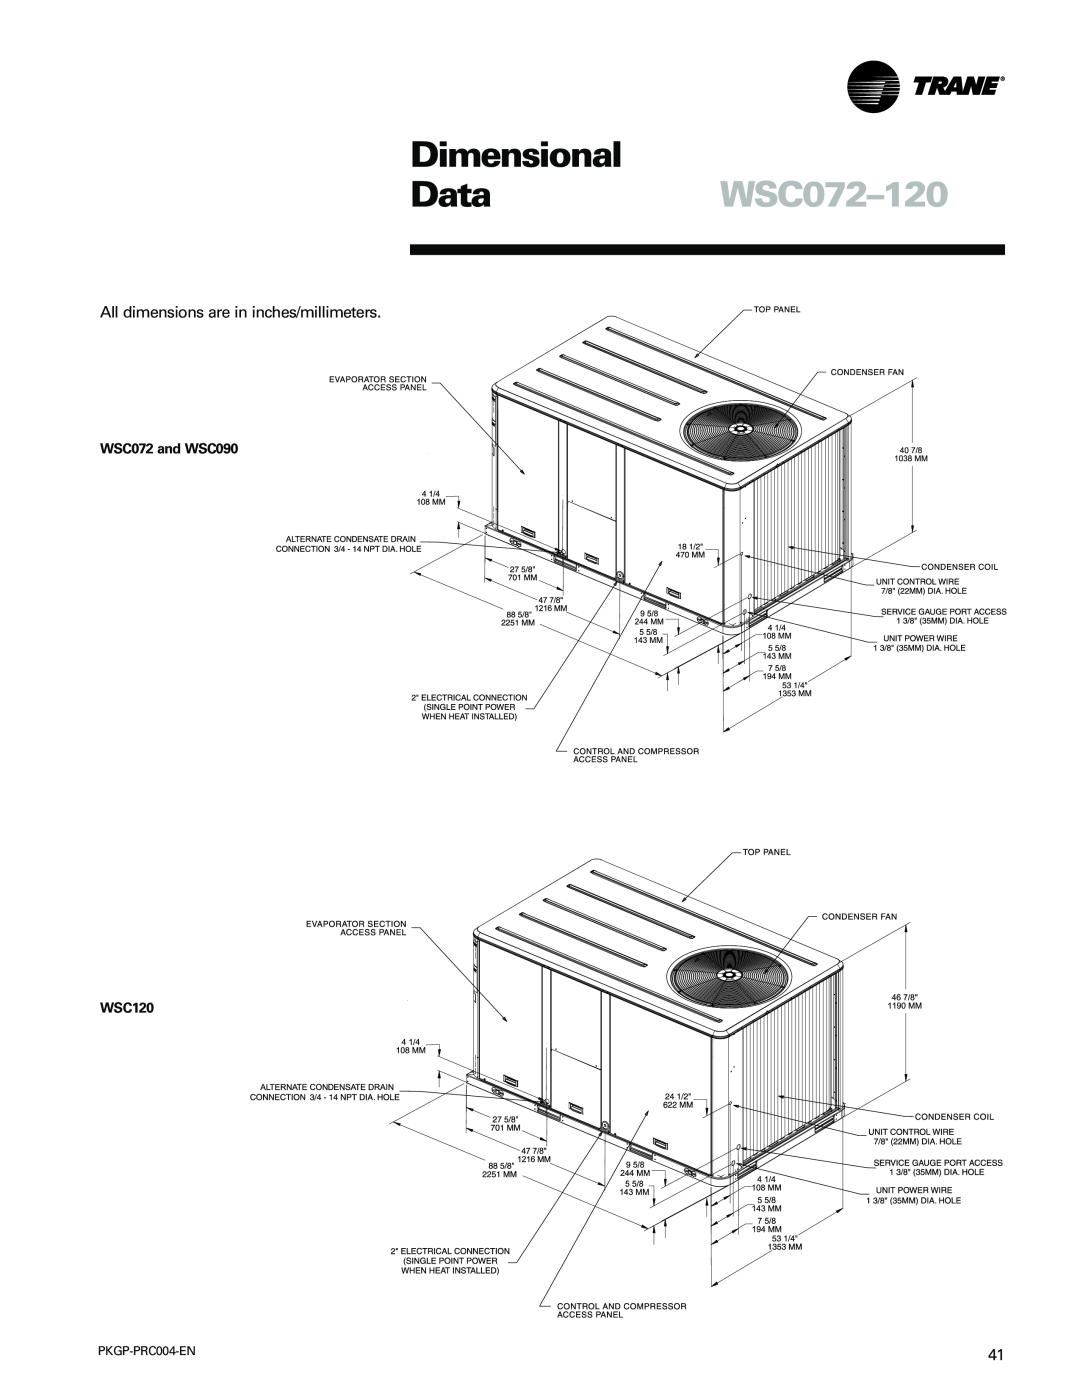 Trane WSC060-120 manual DataWSC072-120, Dimensional, All dimensions are in inches/millimeters, WSC072 and WSC090 WSC120 